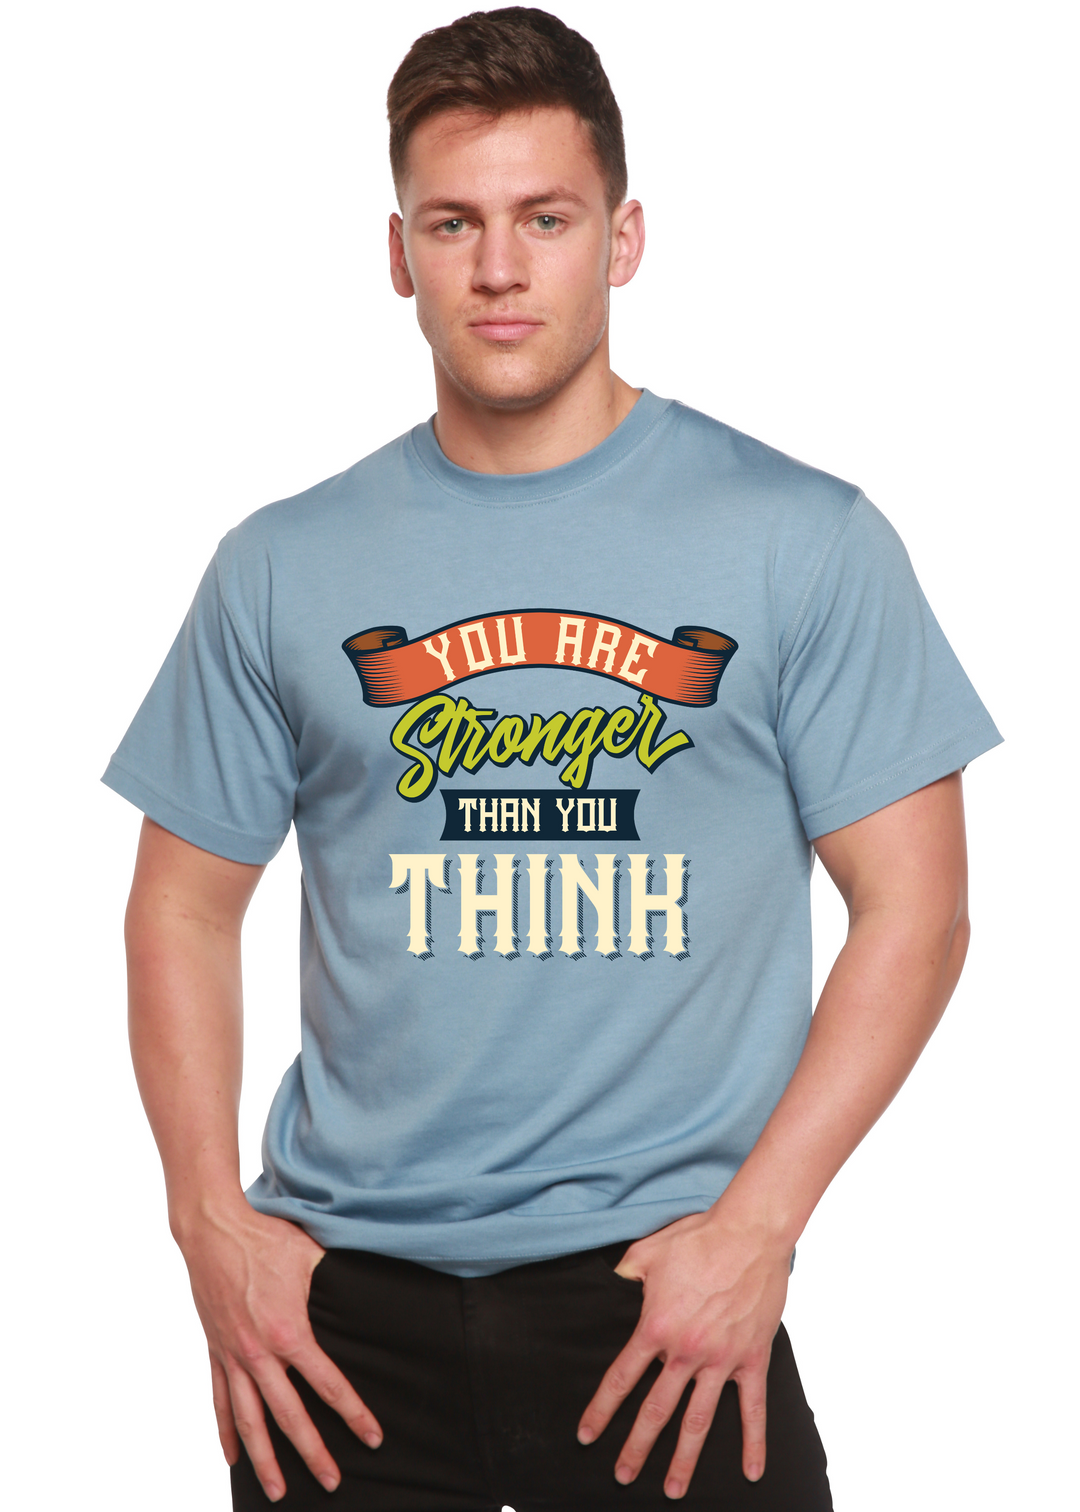 You Are Stronger Than You Think men's bamboo tshirt infinity blue